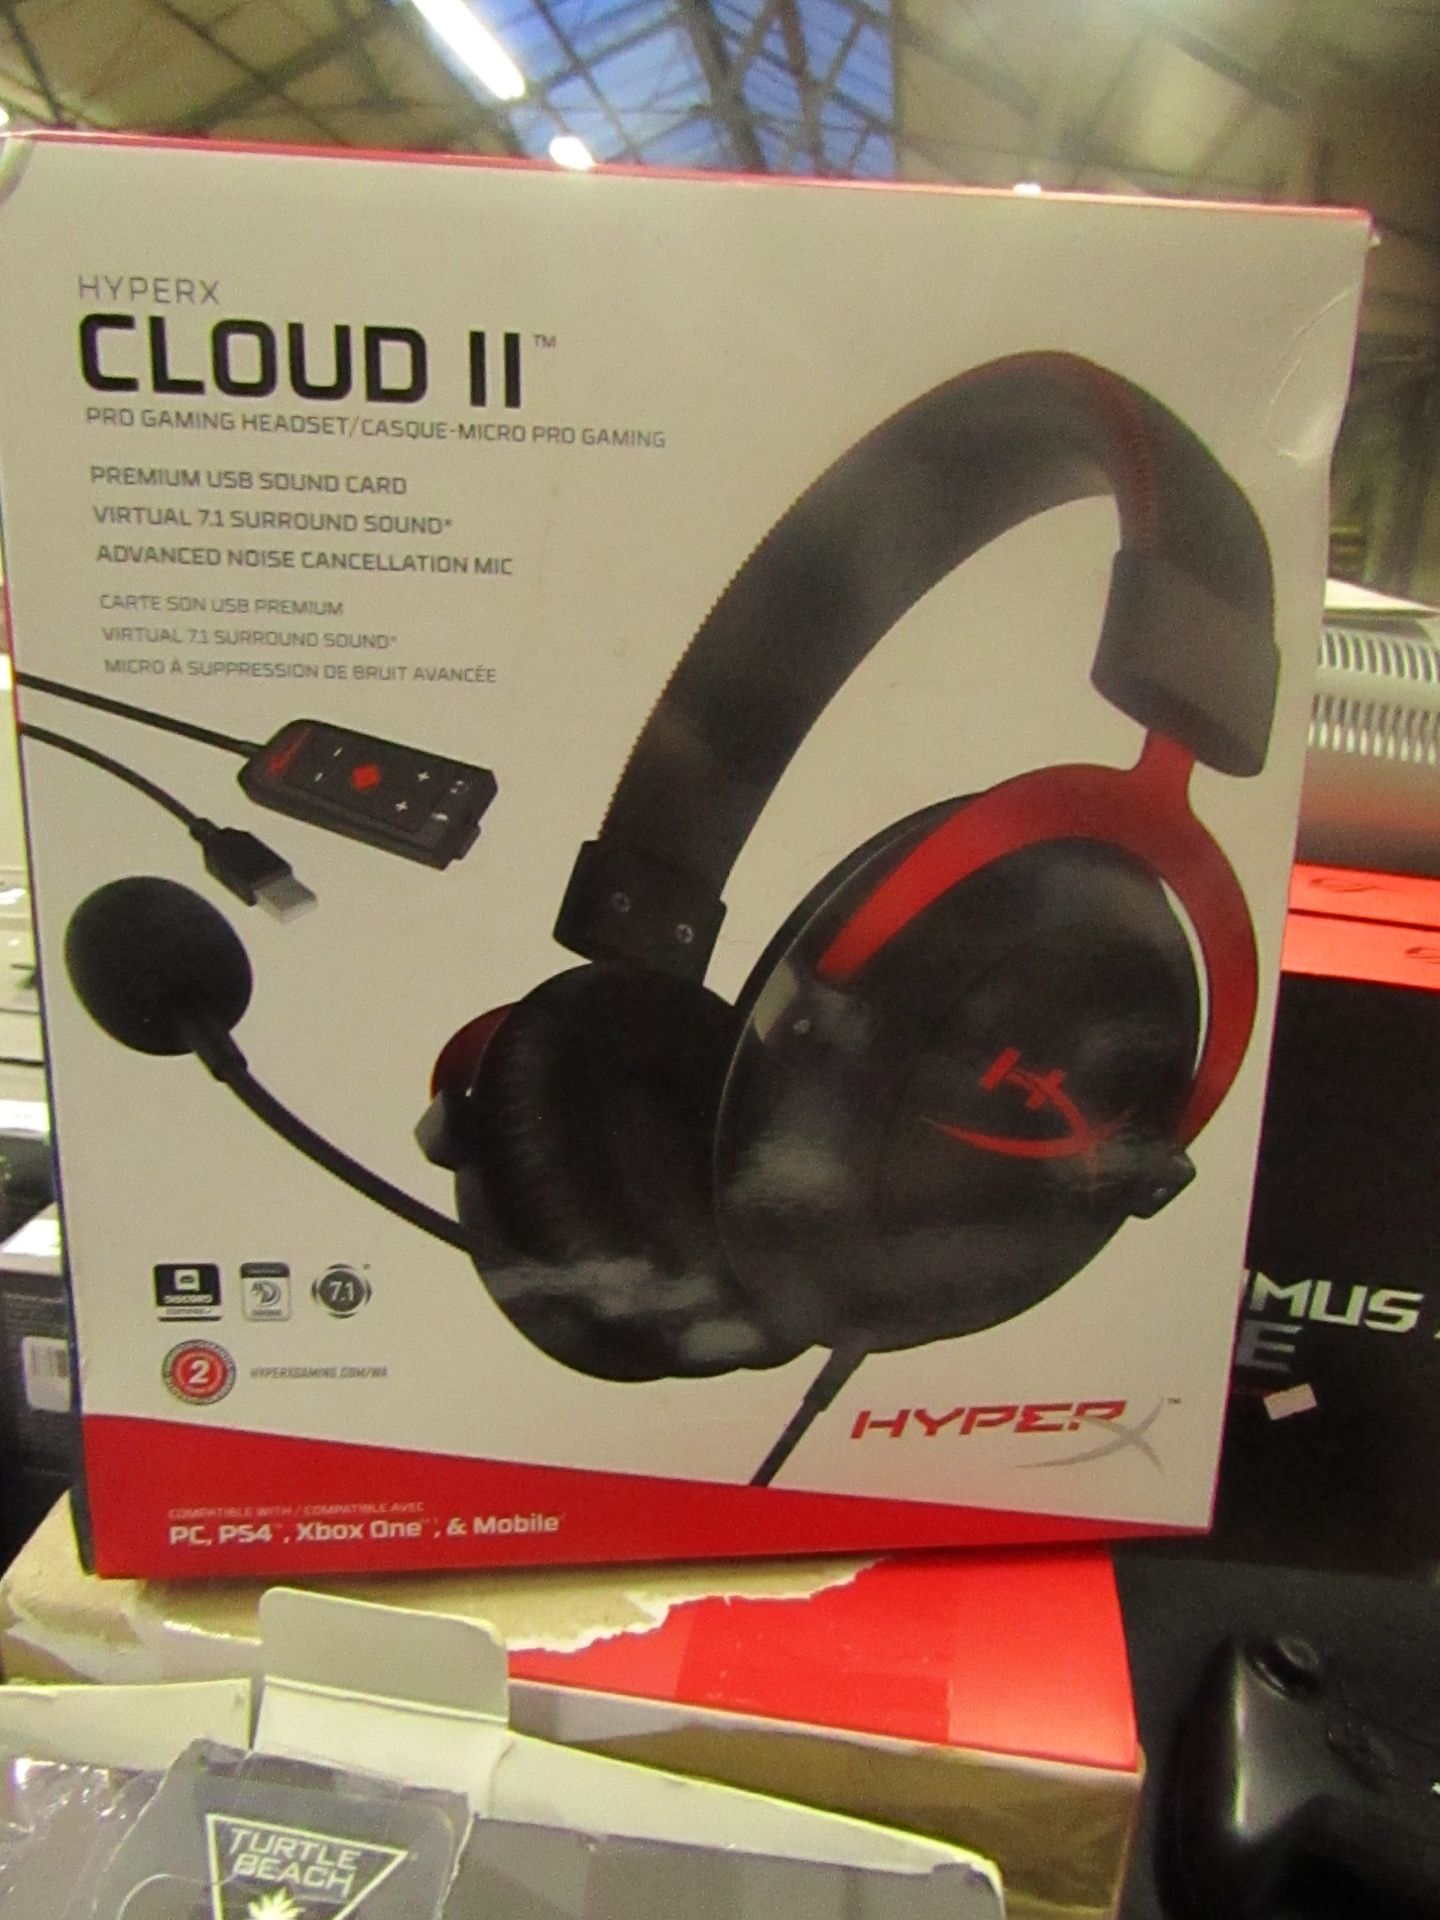 Hyper X Cloud 2 gaming headphones, untested and boxed.